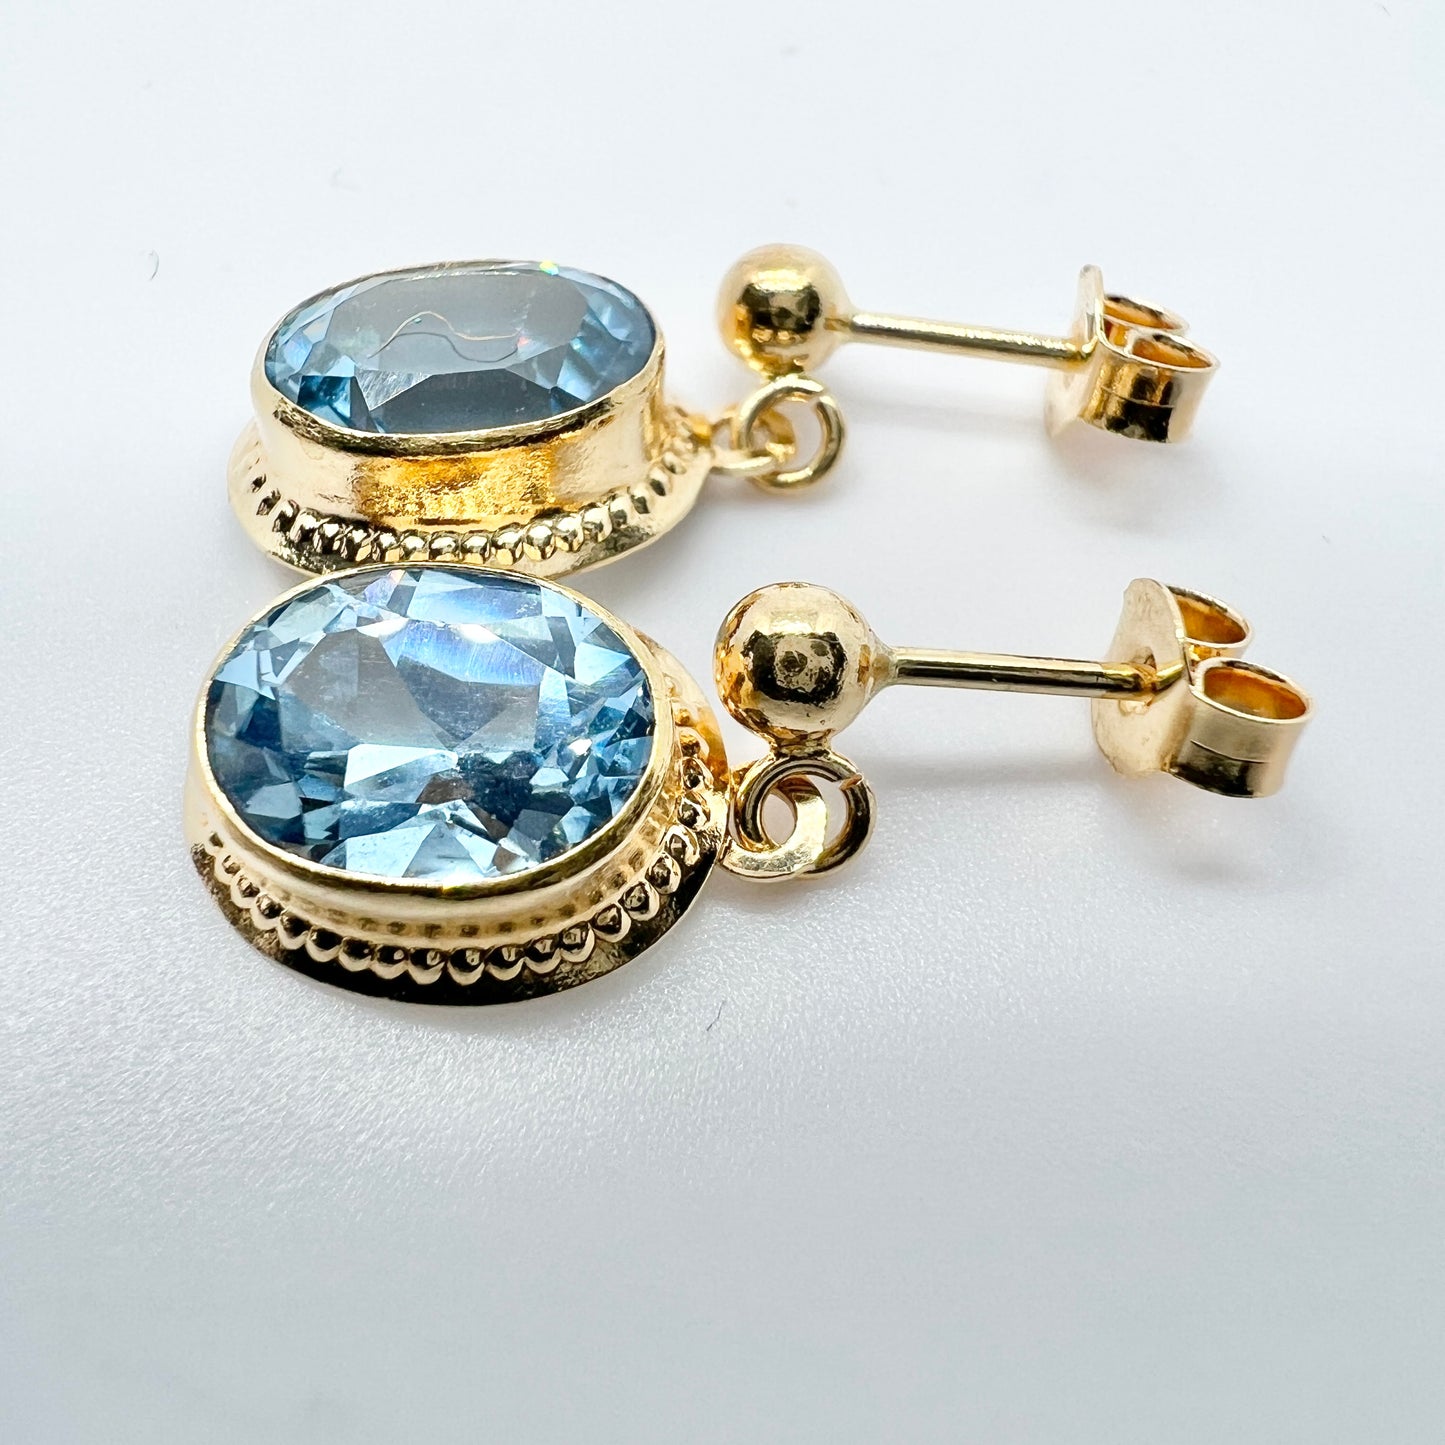 Vintage Mid-century 18k Gold Synthetic Spinel Earrings.